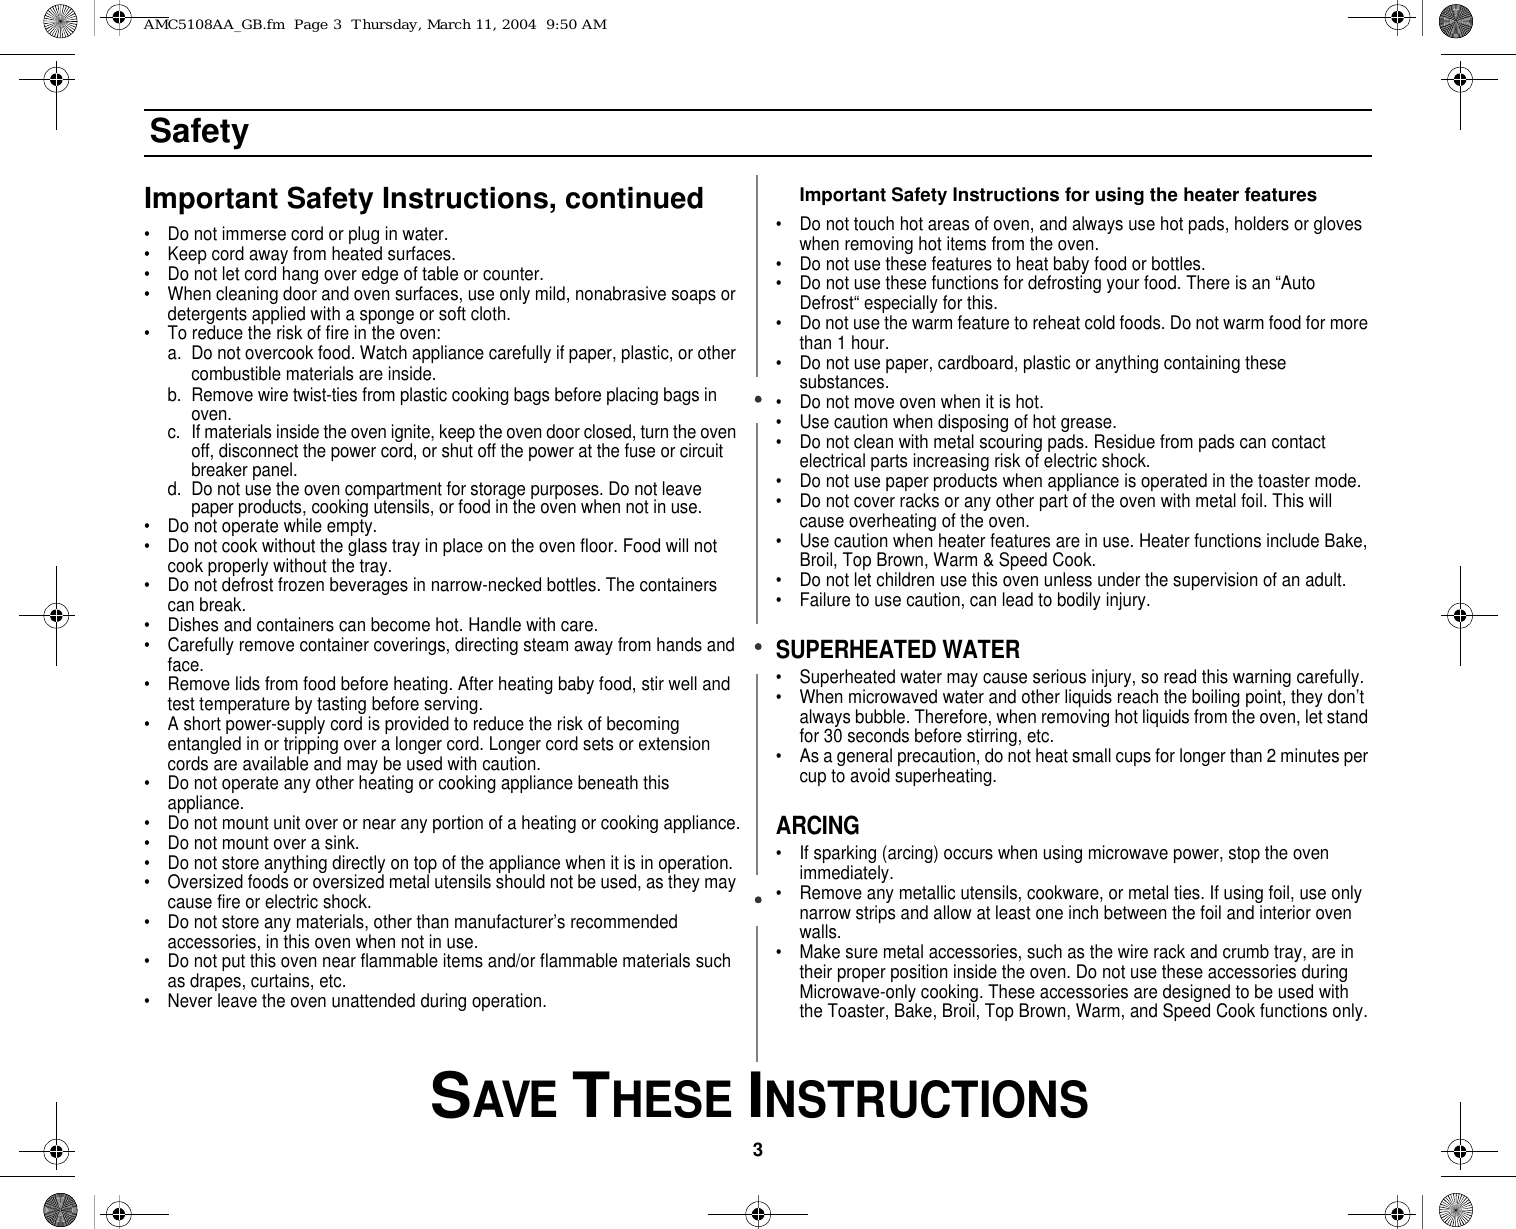 3 SAVE THESE INSTRUCTIONSSafetyImportant Safety Instructions, continued• Do not immerse cord or plug in water.• Keep cord away from heated surfaces.• Do not let cord hang over edge of table or counter.• When cleaning door and oven surfaces, use only mild, nonabrasive soaps or detergents applied with a sponge or soft cloth.• To reduce the risk of fire in the oven:a. Do not overcook food. Watch appliance carefully if paper, plastic, or other combustible materials are inside.b. Remove wire twist-ties from plastic cooking bags before placing bags in oven.c. If materials inside the oven ignite, keep the oven door closed, turn the oven off, disconnect the power cord, or shut off the power at the fuse or circuit breaker panel.d. Do not use the oven compartment for storage purposes. Do not leave paper products, cooking utensils, or food in the oven when not in use.• Do not operate while empty.• Do not cook without the glass tray in place on the oven floor. Food will not cook properly without the tray.• Do not defrost frozen beverages in narrow-necked bottles. The containers can break.• Dishes and containers can become hot. Handle with care.• Carefully remove container coverings, directing steam away from hands and face.• Remove lids from food before heating. After heating baby food, stir well and test temperature by tasting before serving.• A short power-supply cord is provided to reduce the risk of becoming entangled in or tripping over a longer cord. Longer cord sets or extension cords are available and may be used with caution. • Do not operate any other heating or cooking appliance beneath this appliance.• Do not mount unit over or near any portion of a heating or cooking appliance.• Do not mount over a sink.• Do not store anything directly on top of the appliance when it is in operation.• Oversized foods or oversized metal utensils should not be used, as they may cause fire or electric shock.• Do not store any materials, other than manufacturer’s recommended accessories, in this oven when not in use.• Do not put this oven near flammable items and/or flammable materials such as drapes, curtains, etc.• Never leave the oven unattended during operation.Important Safety Instructions for using the heater features• Do not touch hot areas of oven, and always use hot pads, holders or gloves when removing hot items from the oven.• Do not use these features to heat baby food or bottles.• Do not use these functions for defrosting your food. There is an “Auto Defrost“ especially for this.• Do not use the warm feature to reheat cold foods. Do not warm food for more than 1 hour.• Do not use paper, cardboard, plastic or anything containing these substances.• Do not move oven when it is hot.• Use caution when disposing of hot grease.• Do not clean with metal scouring pads. Residue from pads can contact electrical parts increasing risk of electric shock. • Do not use paper products when appliance is operated in the toaster mode.• Do not cover racks or any other part of the oven with metal foil. This will cause overheating of the oven.• Use caution when heater features are in use. Heater functions include Bake, Broil, Top Brown, Warm &amp; Speed Cook.• Do not let children use this oven unless under the supervision of an adult.• Failure to use caution, can lead to bodily injury.SUPERHEATED WATER• Superheated water may cause serious injury, so read this warning carefully.• When microwaved water and other liquids reach the boiling point, they don’t always bubble. Therefore, when removing hot liquids from the oven, let stand for 30 seconds before stirring, etc.• As a general precaution, do not heat small cups for longer than 2 minutes per cup to avoid superheating.ARCING• If sparking (arcing) occurs when using microwave power, stop the oven immediately.• Remove any metallic utensils, cookware, or metal ties. If using foil, use only narrow strips and allow at least one inch between the foil and interior oven walls.• Make sure metal accessories, such as the wire rack and crumb tray, are in their proper position inside the oven. Do not use these accessories during Microwave-only cooking. These accessories are designed to be used with the Toaster, Bake, Broil, Top Brown, Warm, and Speed Cook functions only.AMC5108AA_GB.fm  Page 3  Thursday, March 11, 2004  9:50 AM